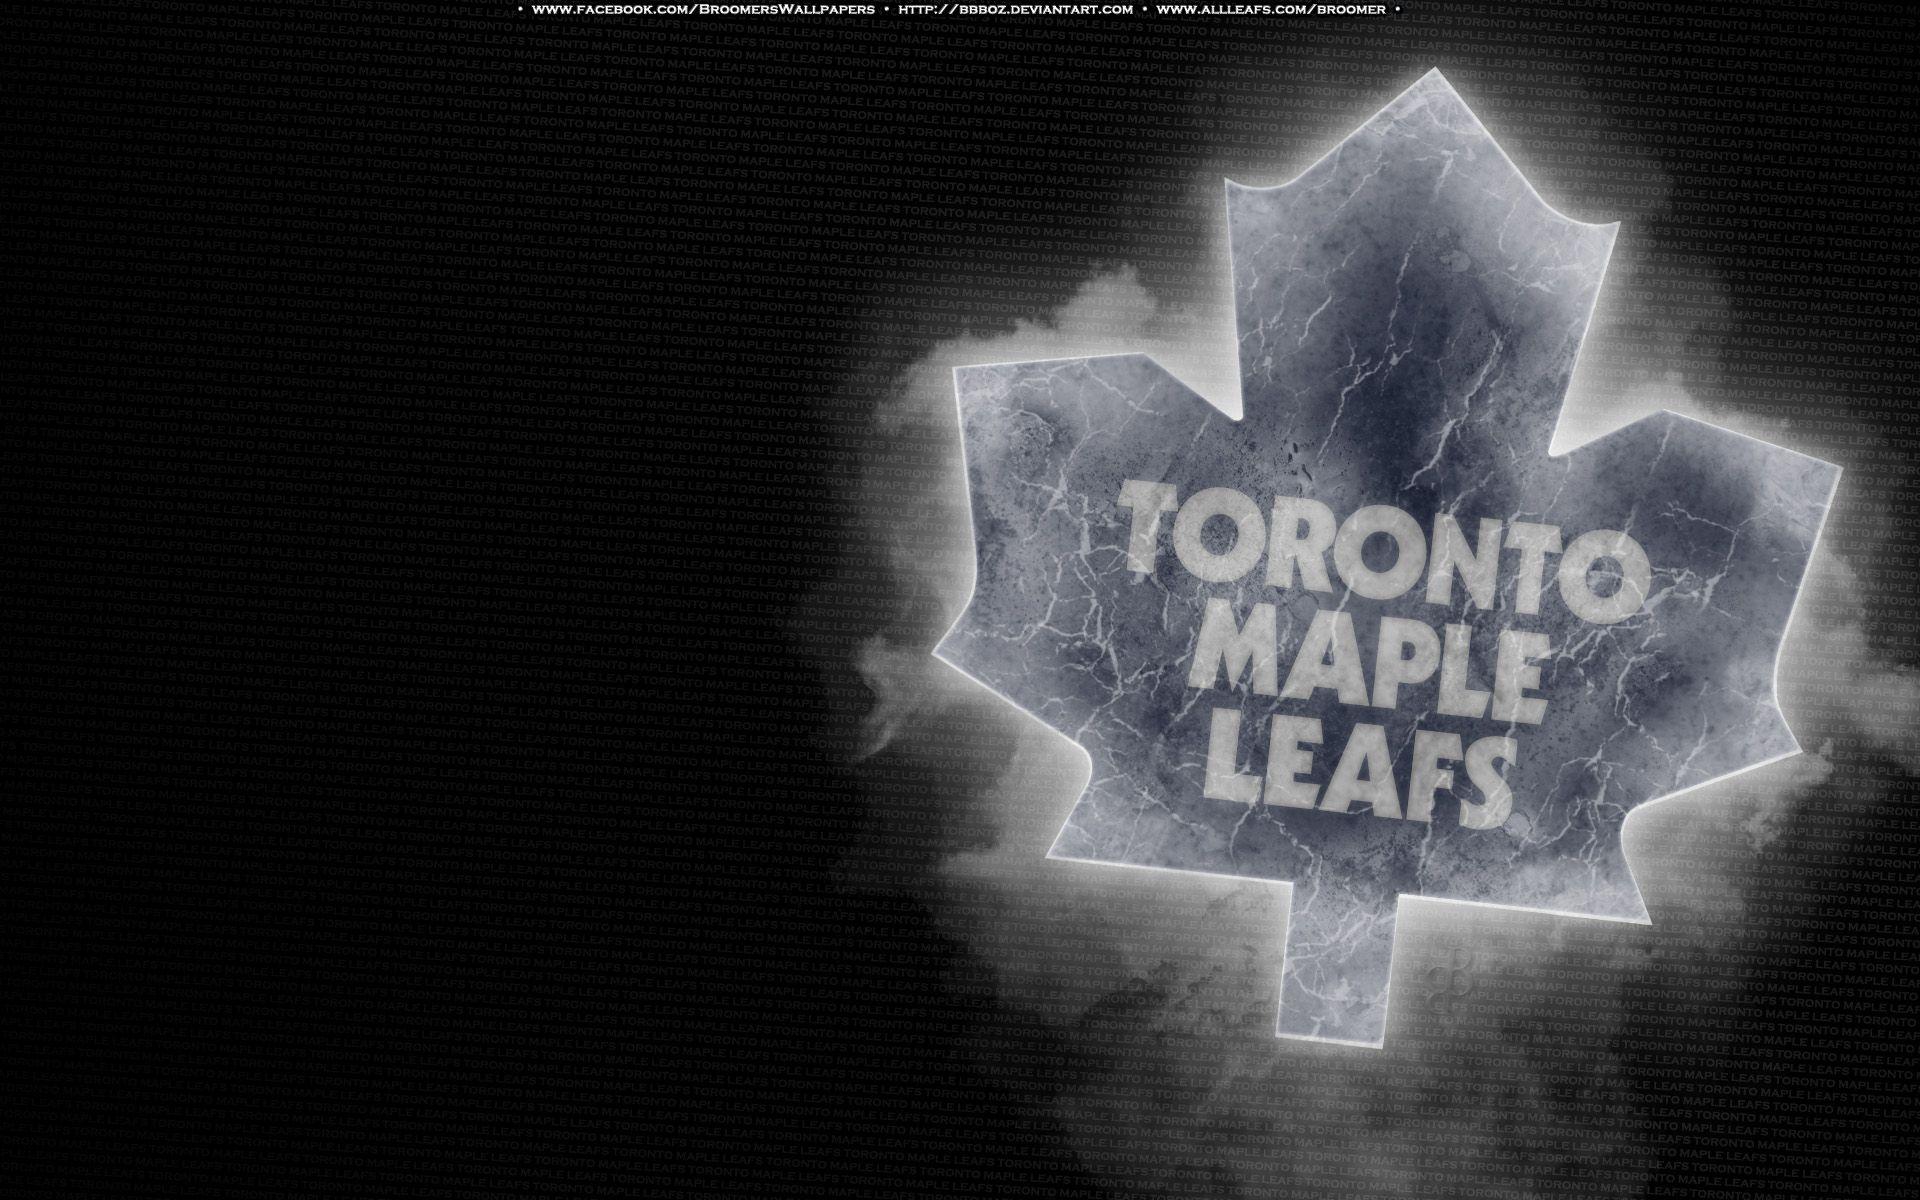 200+] Toronto Maple Leafs Wallpapers | Wallpapers.com